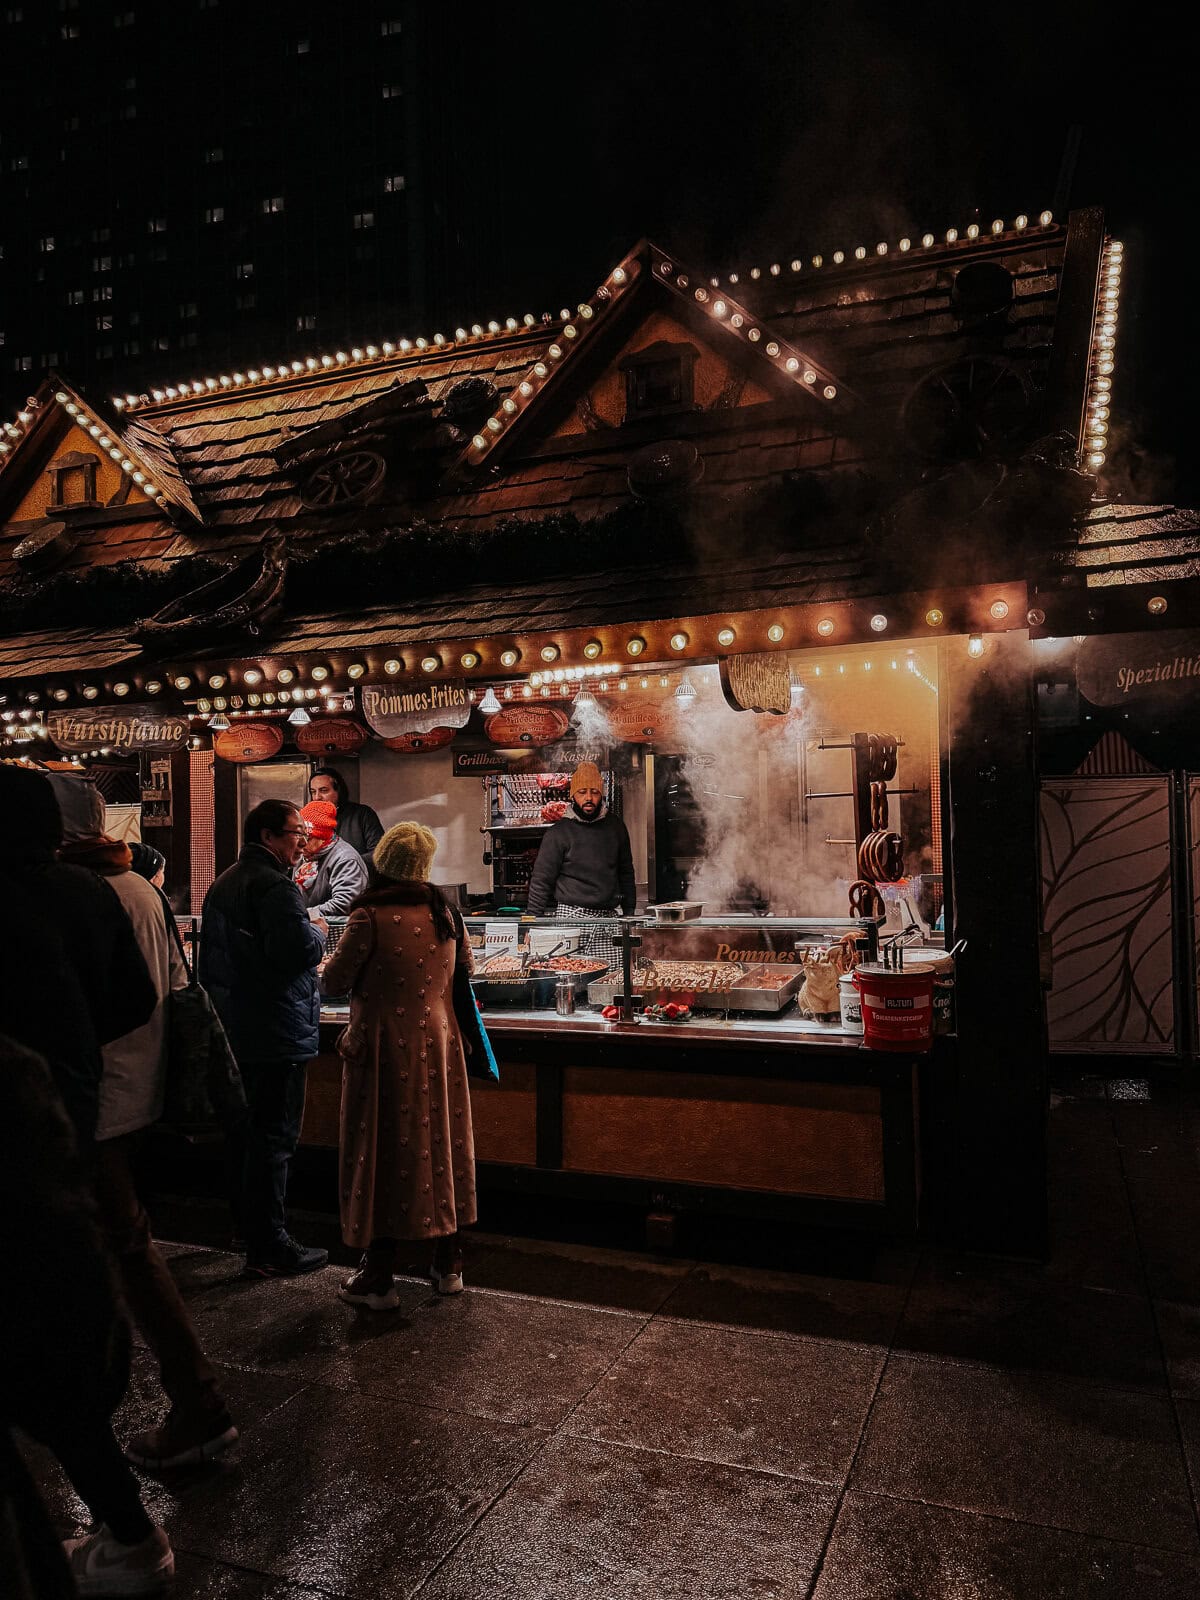 A bustling outdoor food stall at night, decorated with festive lights and emitting steam from cooking. People are gathered around, ordering and waiting for food, creating a lively winter market scene